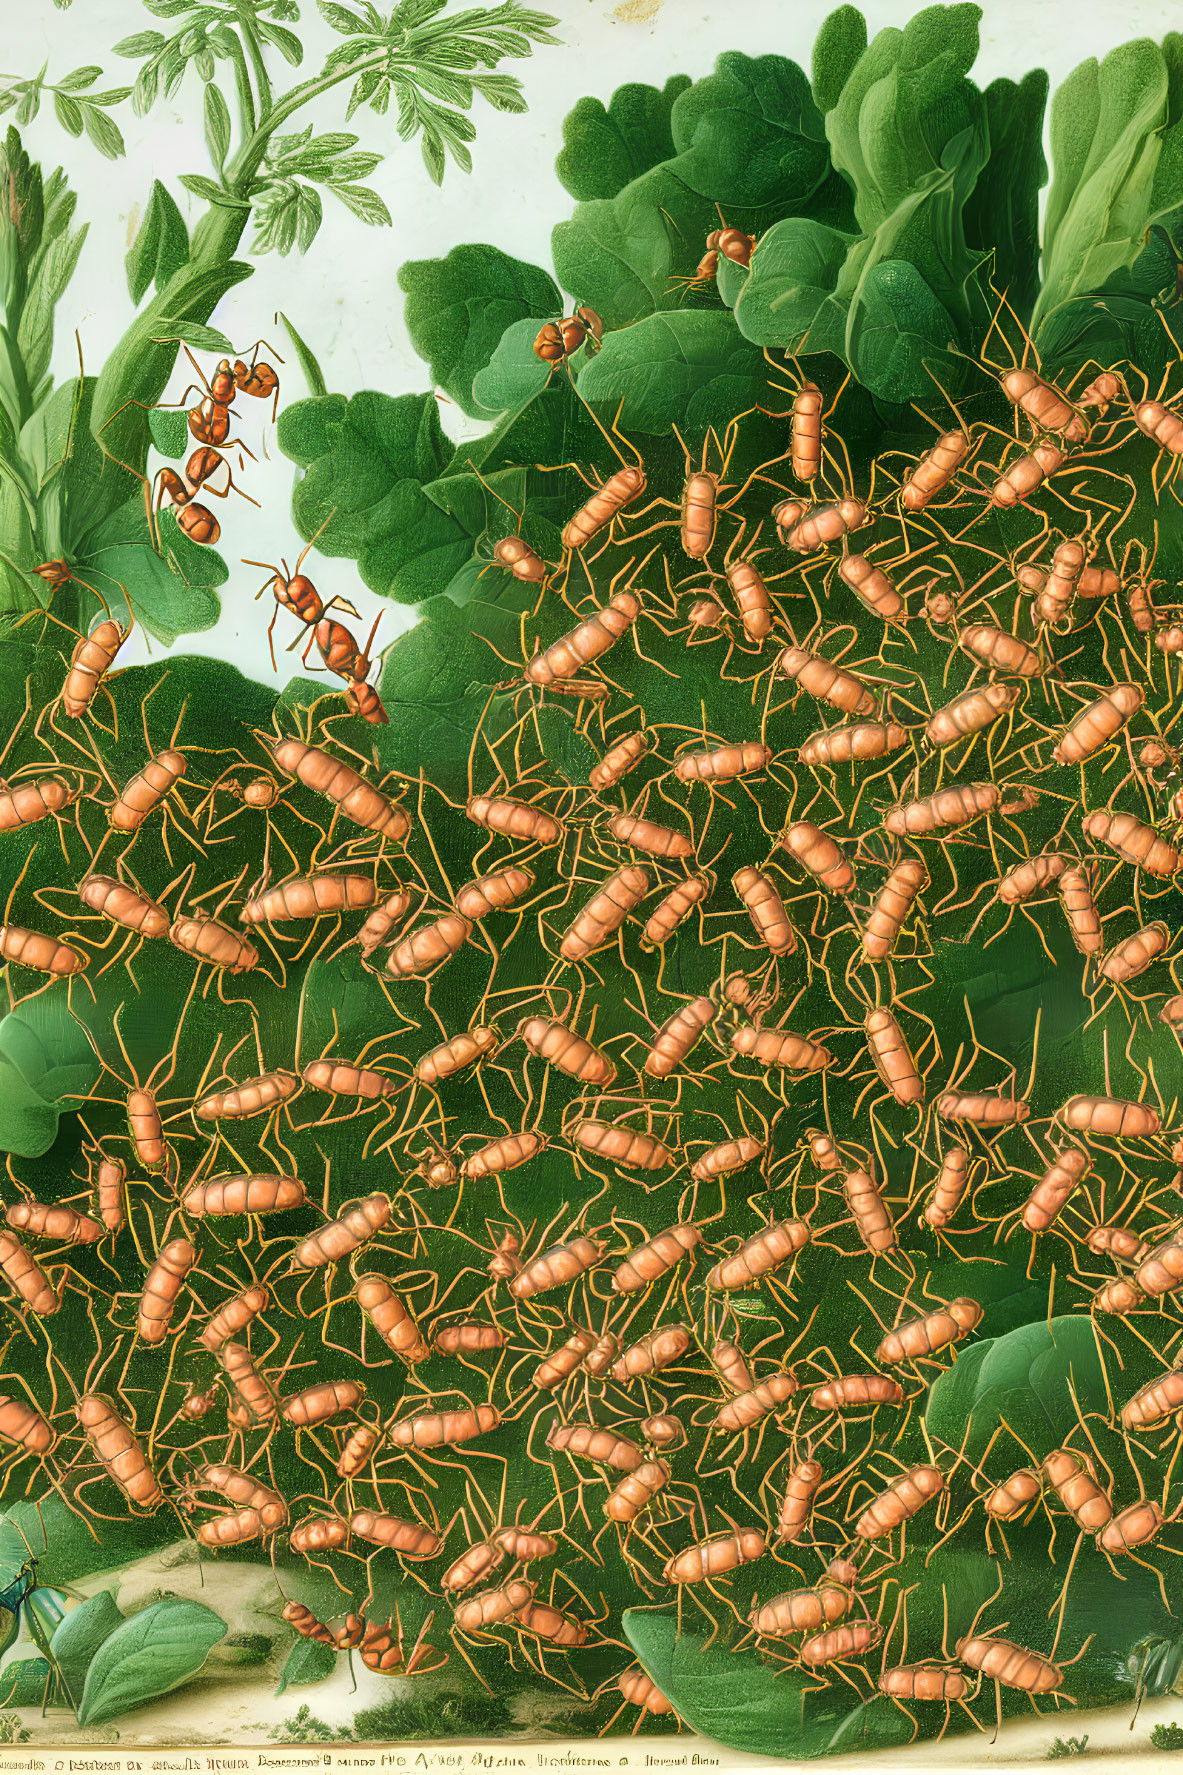 Detailed Illustration of Red Ants on Green Foliage